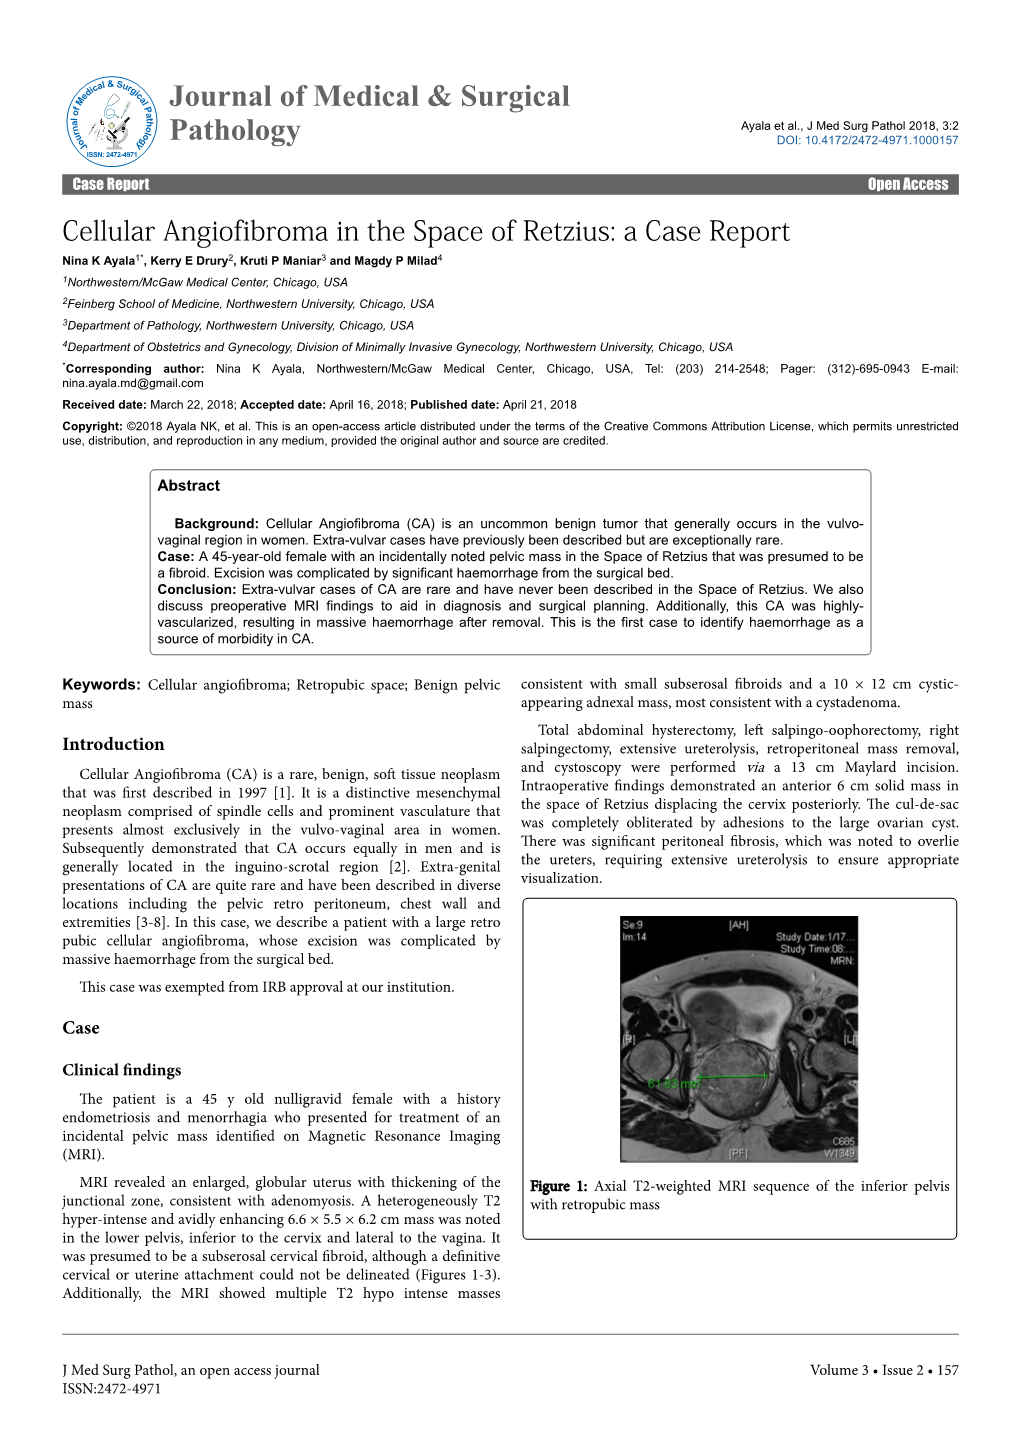 Cellular Angiofibroma in the Space of Retzius: a Case Report